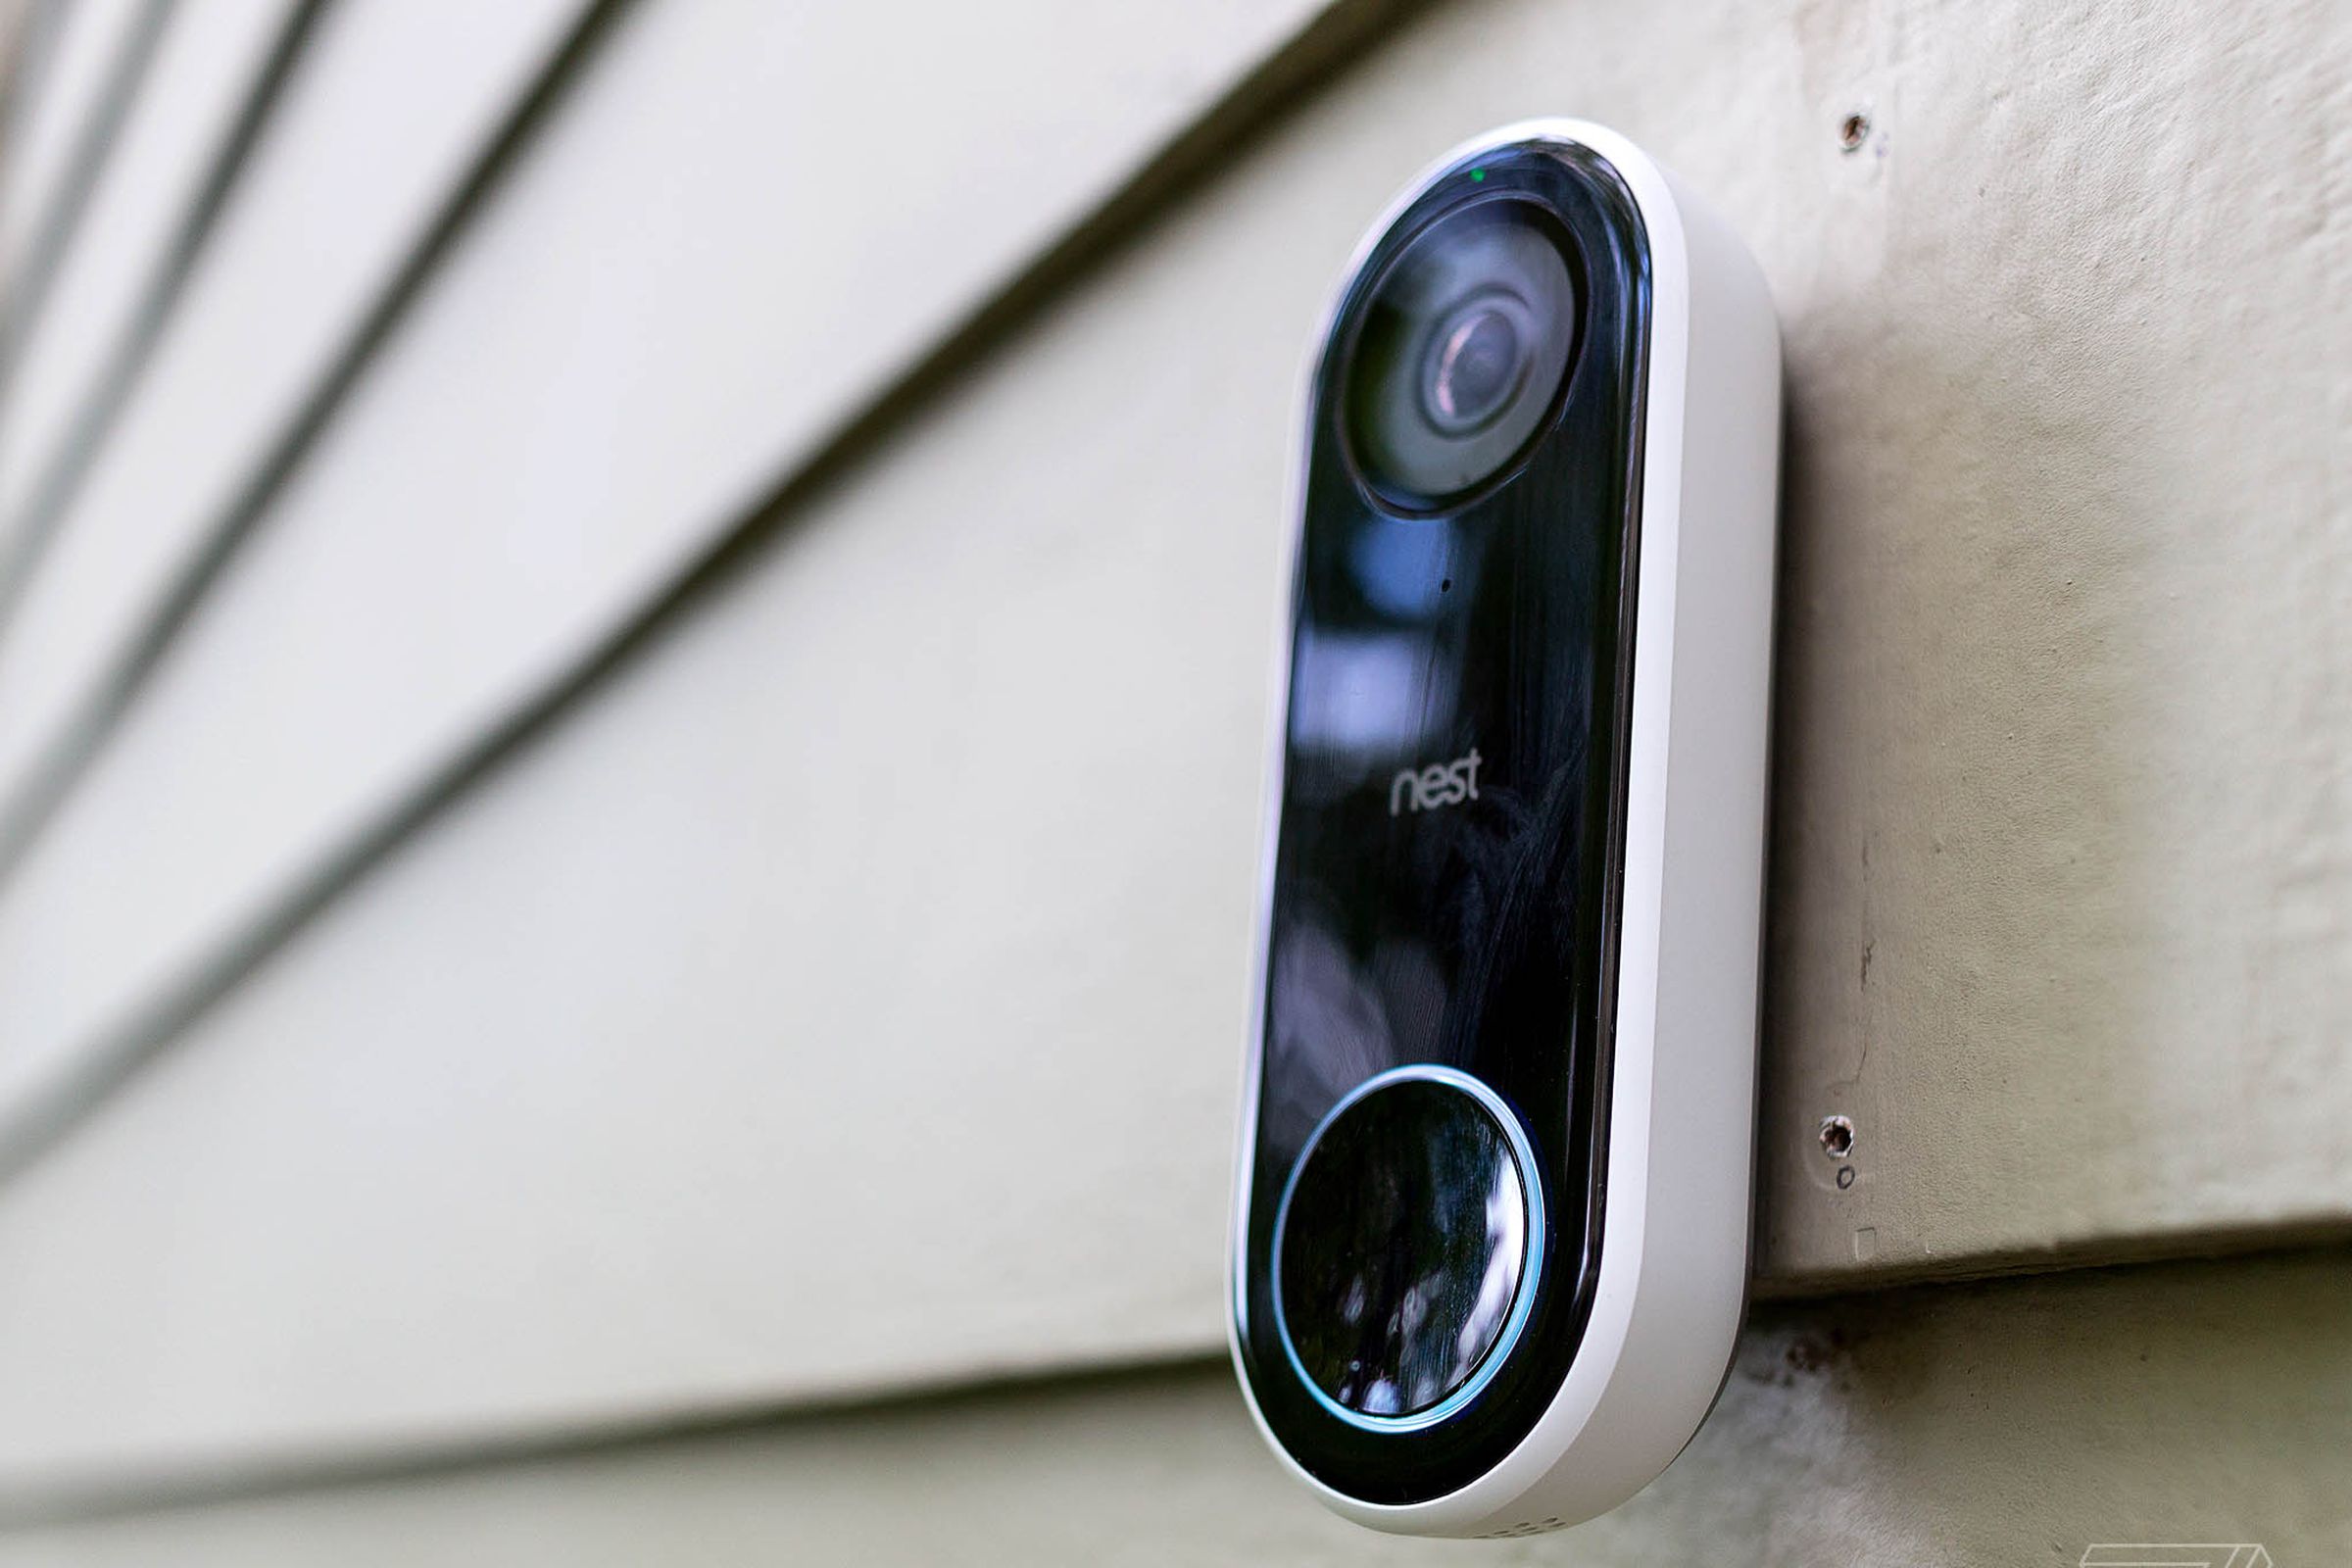 A new version of the excellent Nest Hello video doorbell (pictured) will arrive in 2022.